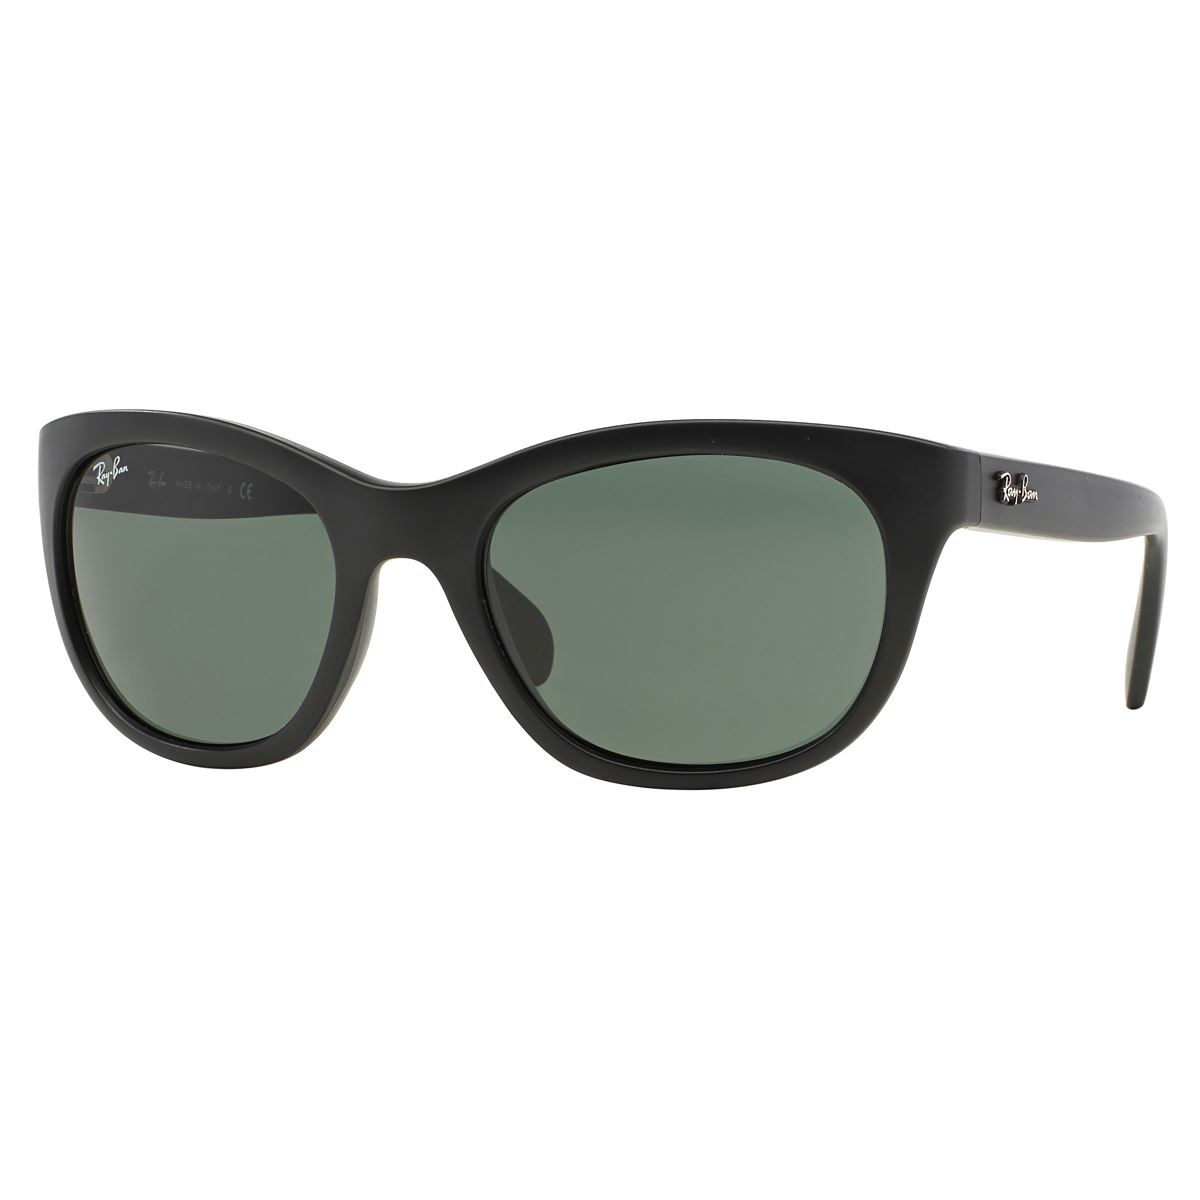 Solar Ray Ban 0rb4216 601s7156 M